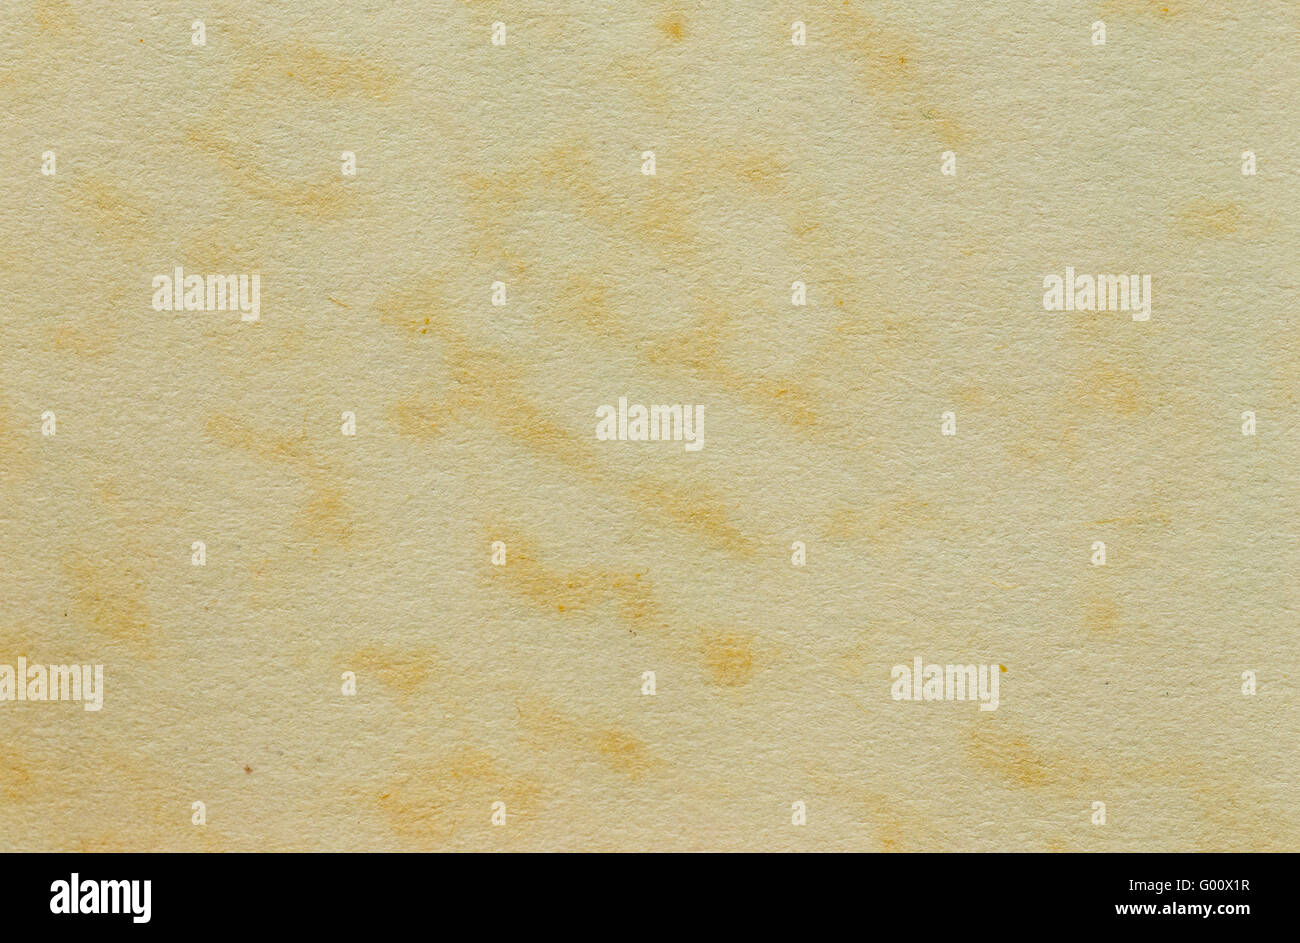 Natural paper texture background with particles for design-use Stock Photo